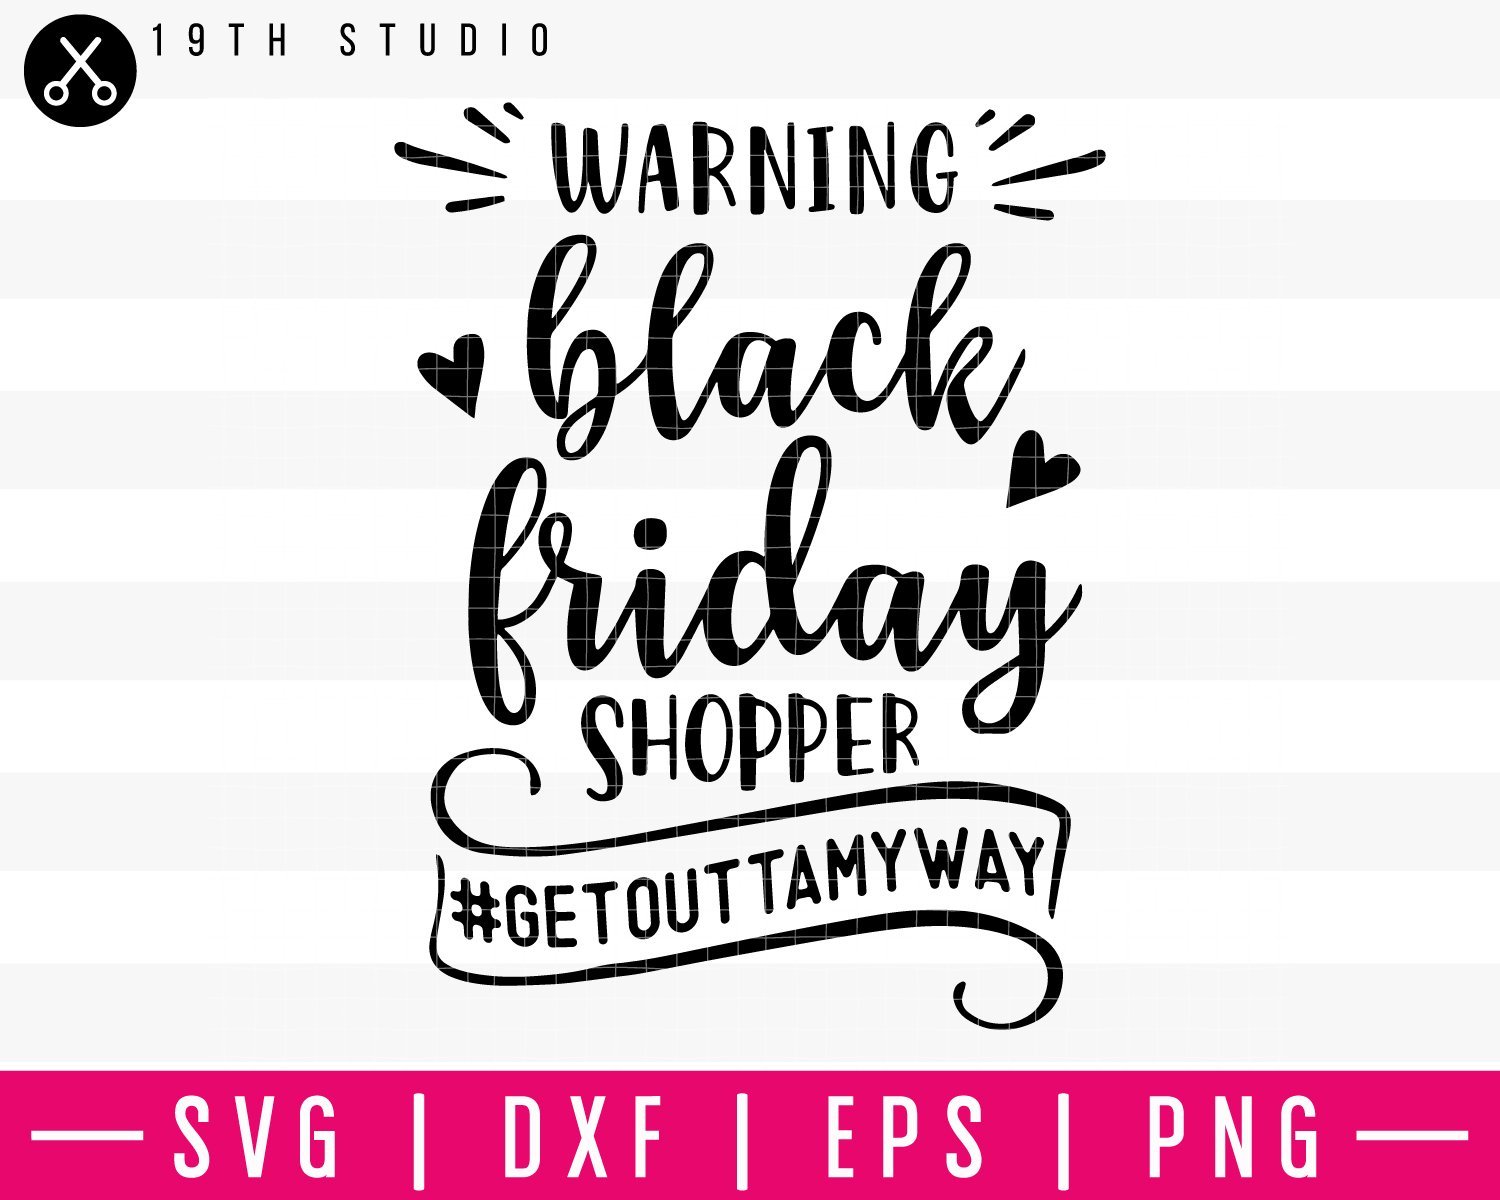 Warning Black Friday shopper SVG | M35F15 Craft House SVG - SVG files for Cricut and Silhouette